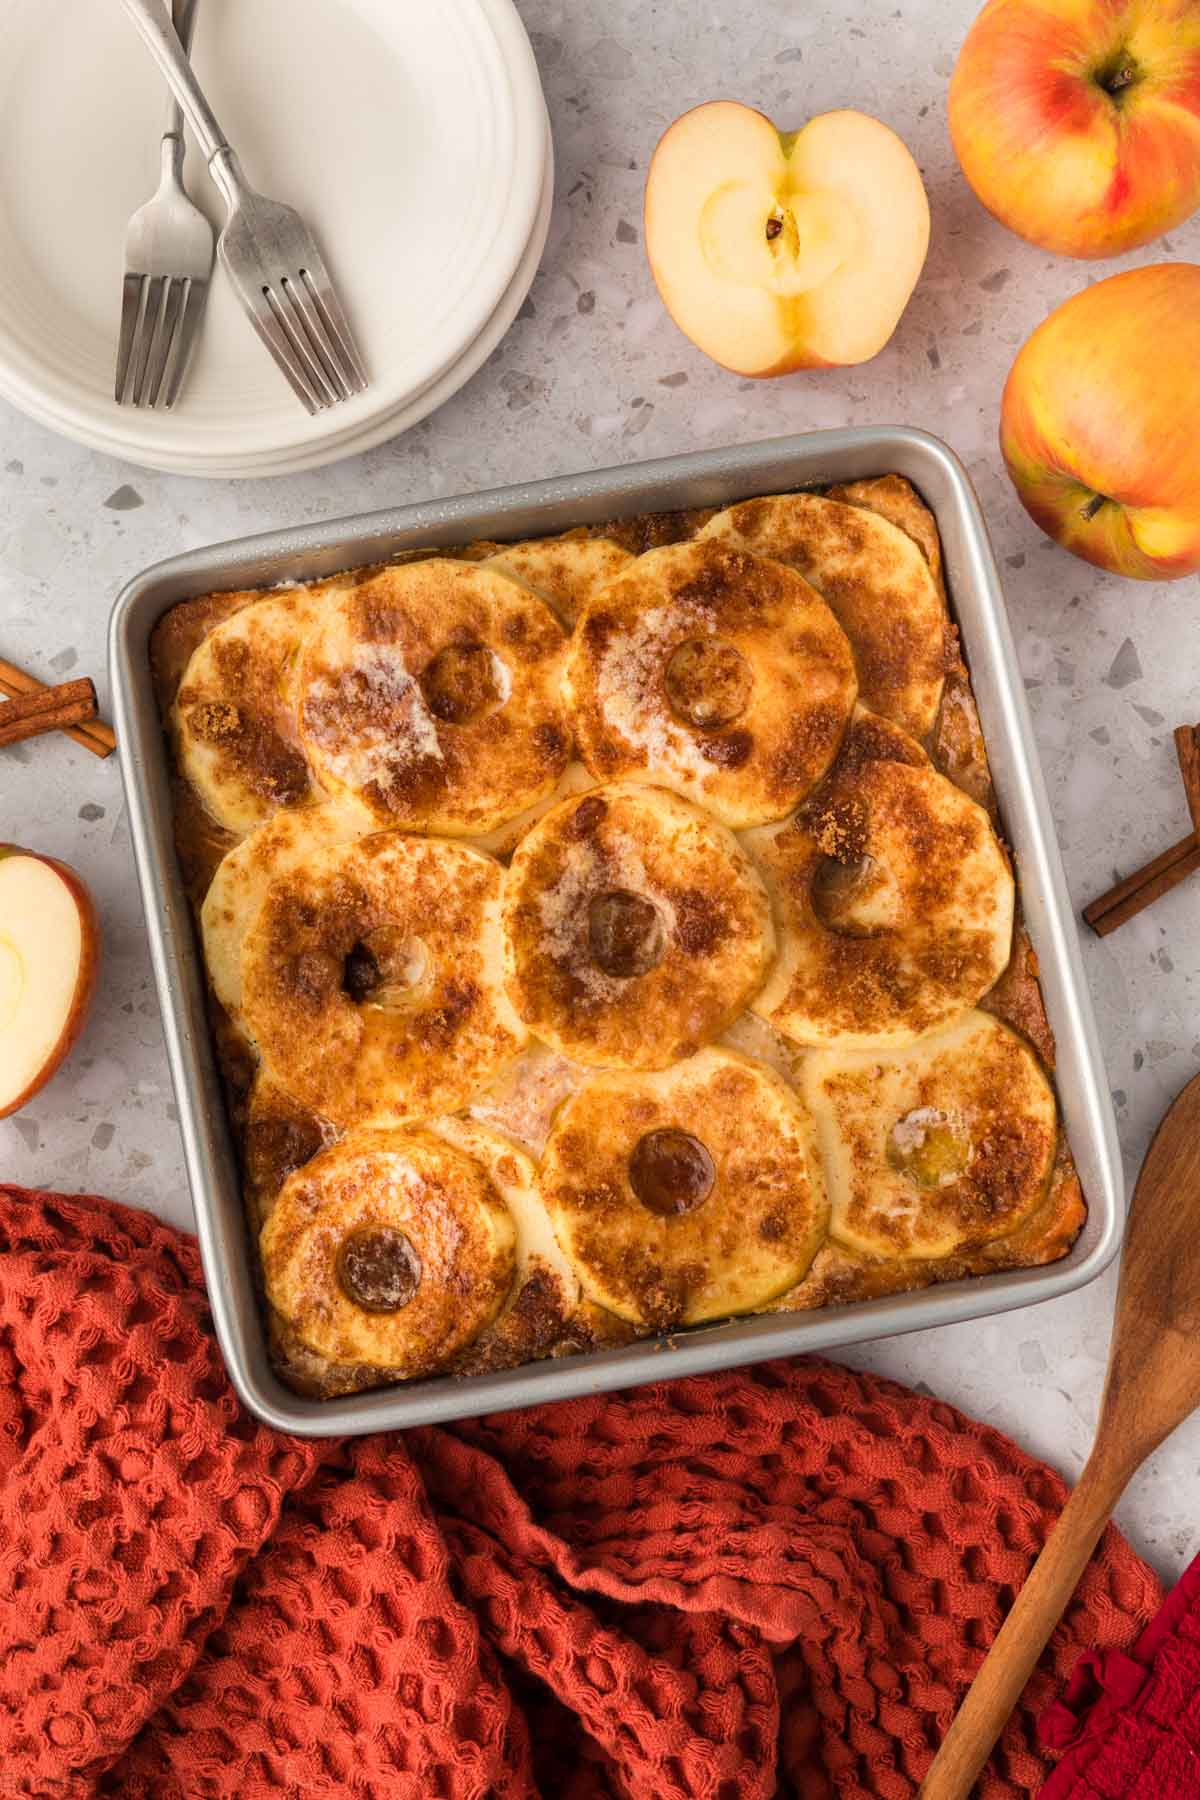 Sweet potato and apple casserole in a baking dish